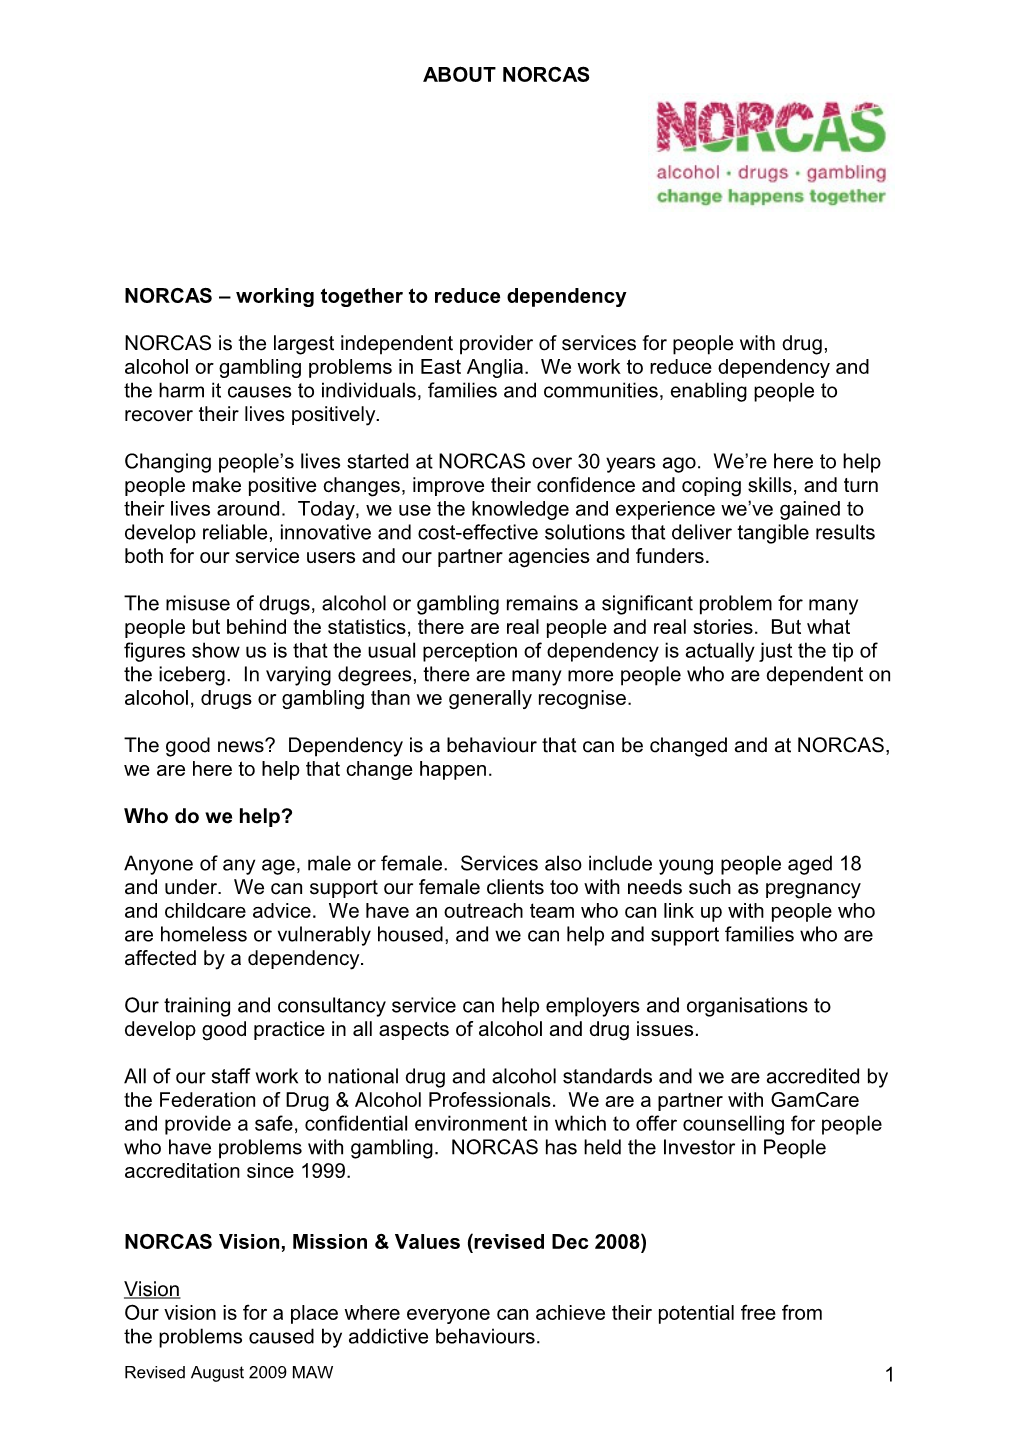 NORCAS Working Together to Reduce Dependency